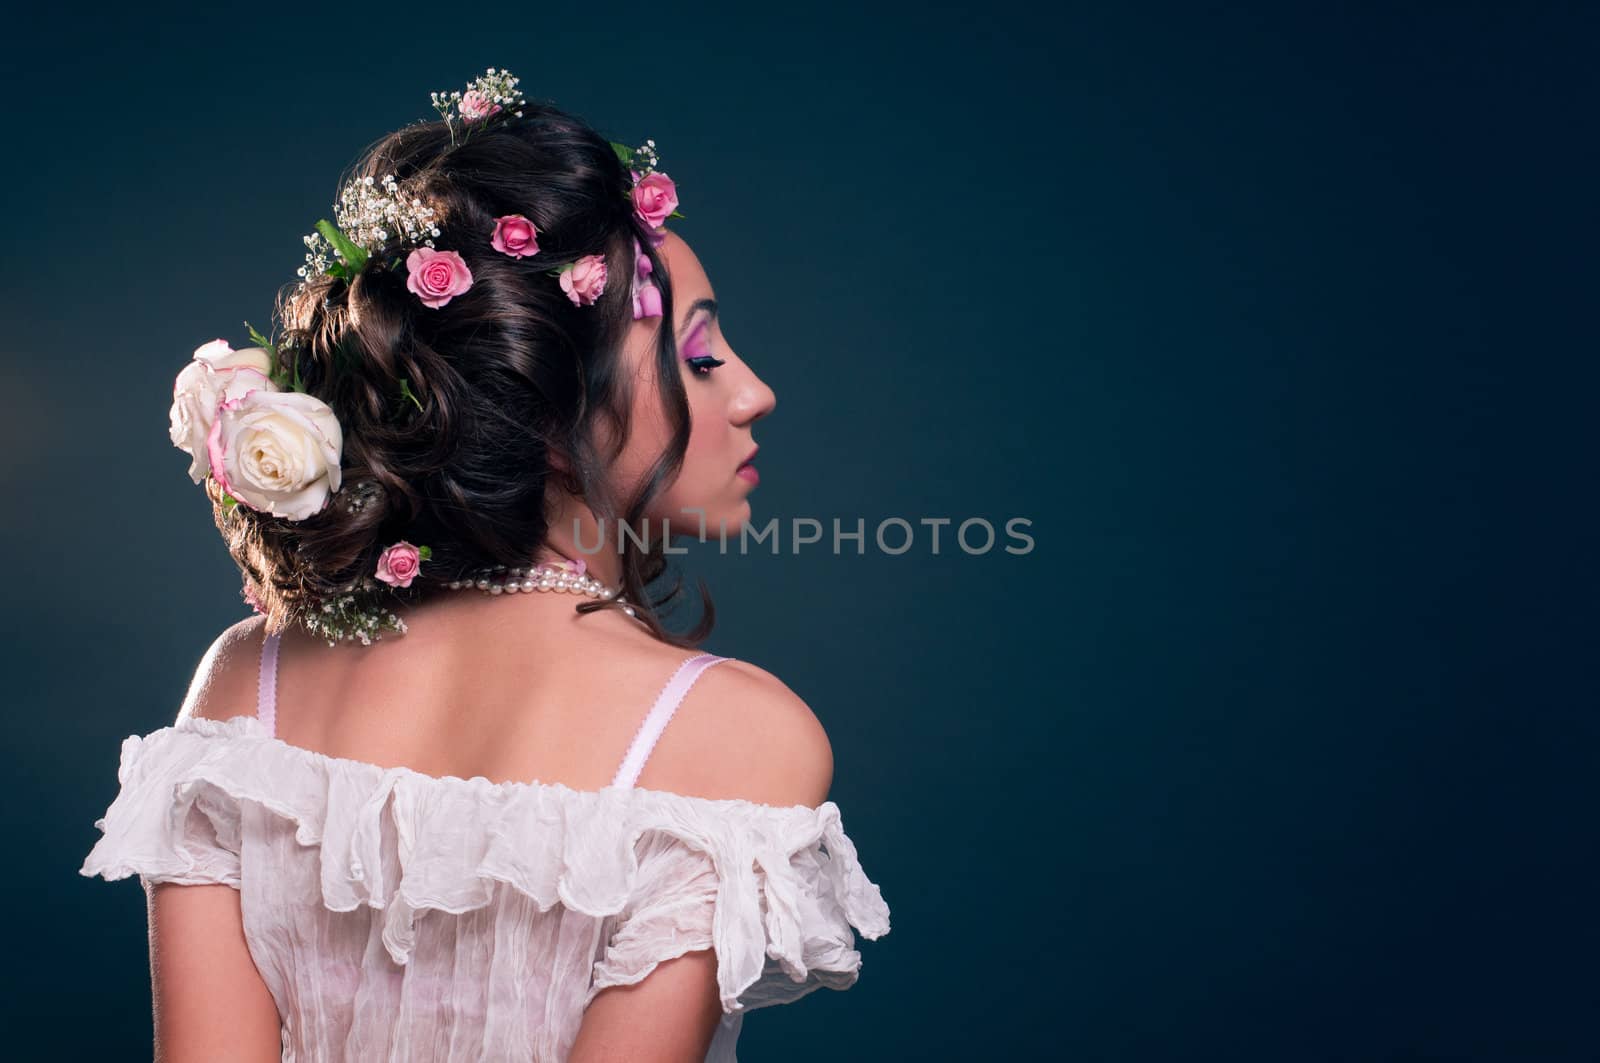 Young girl with creative hairstyle with flowers